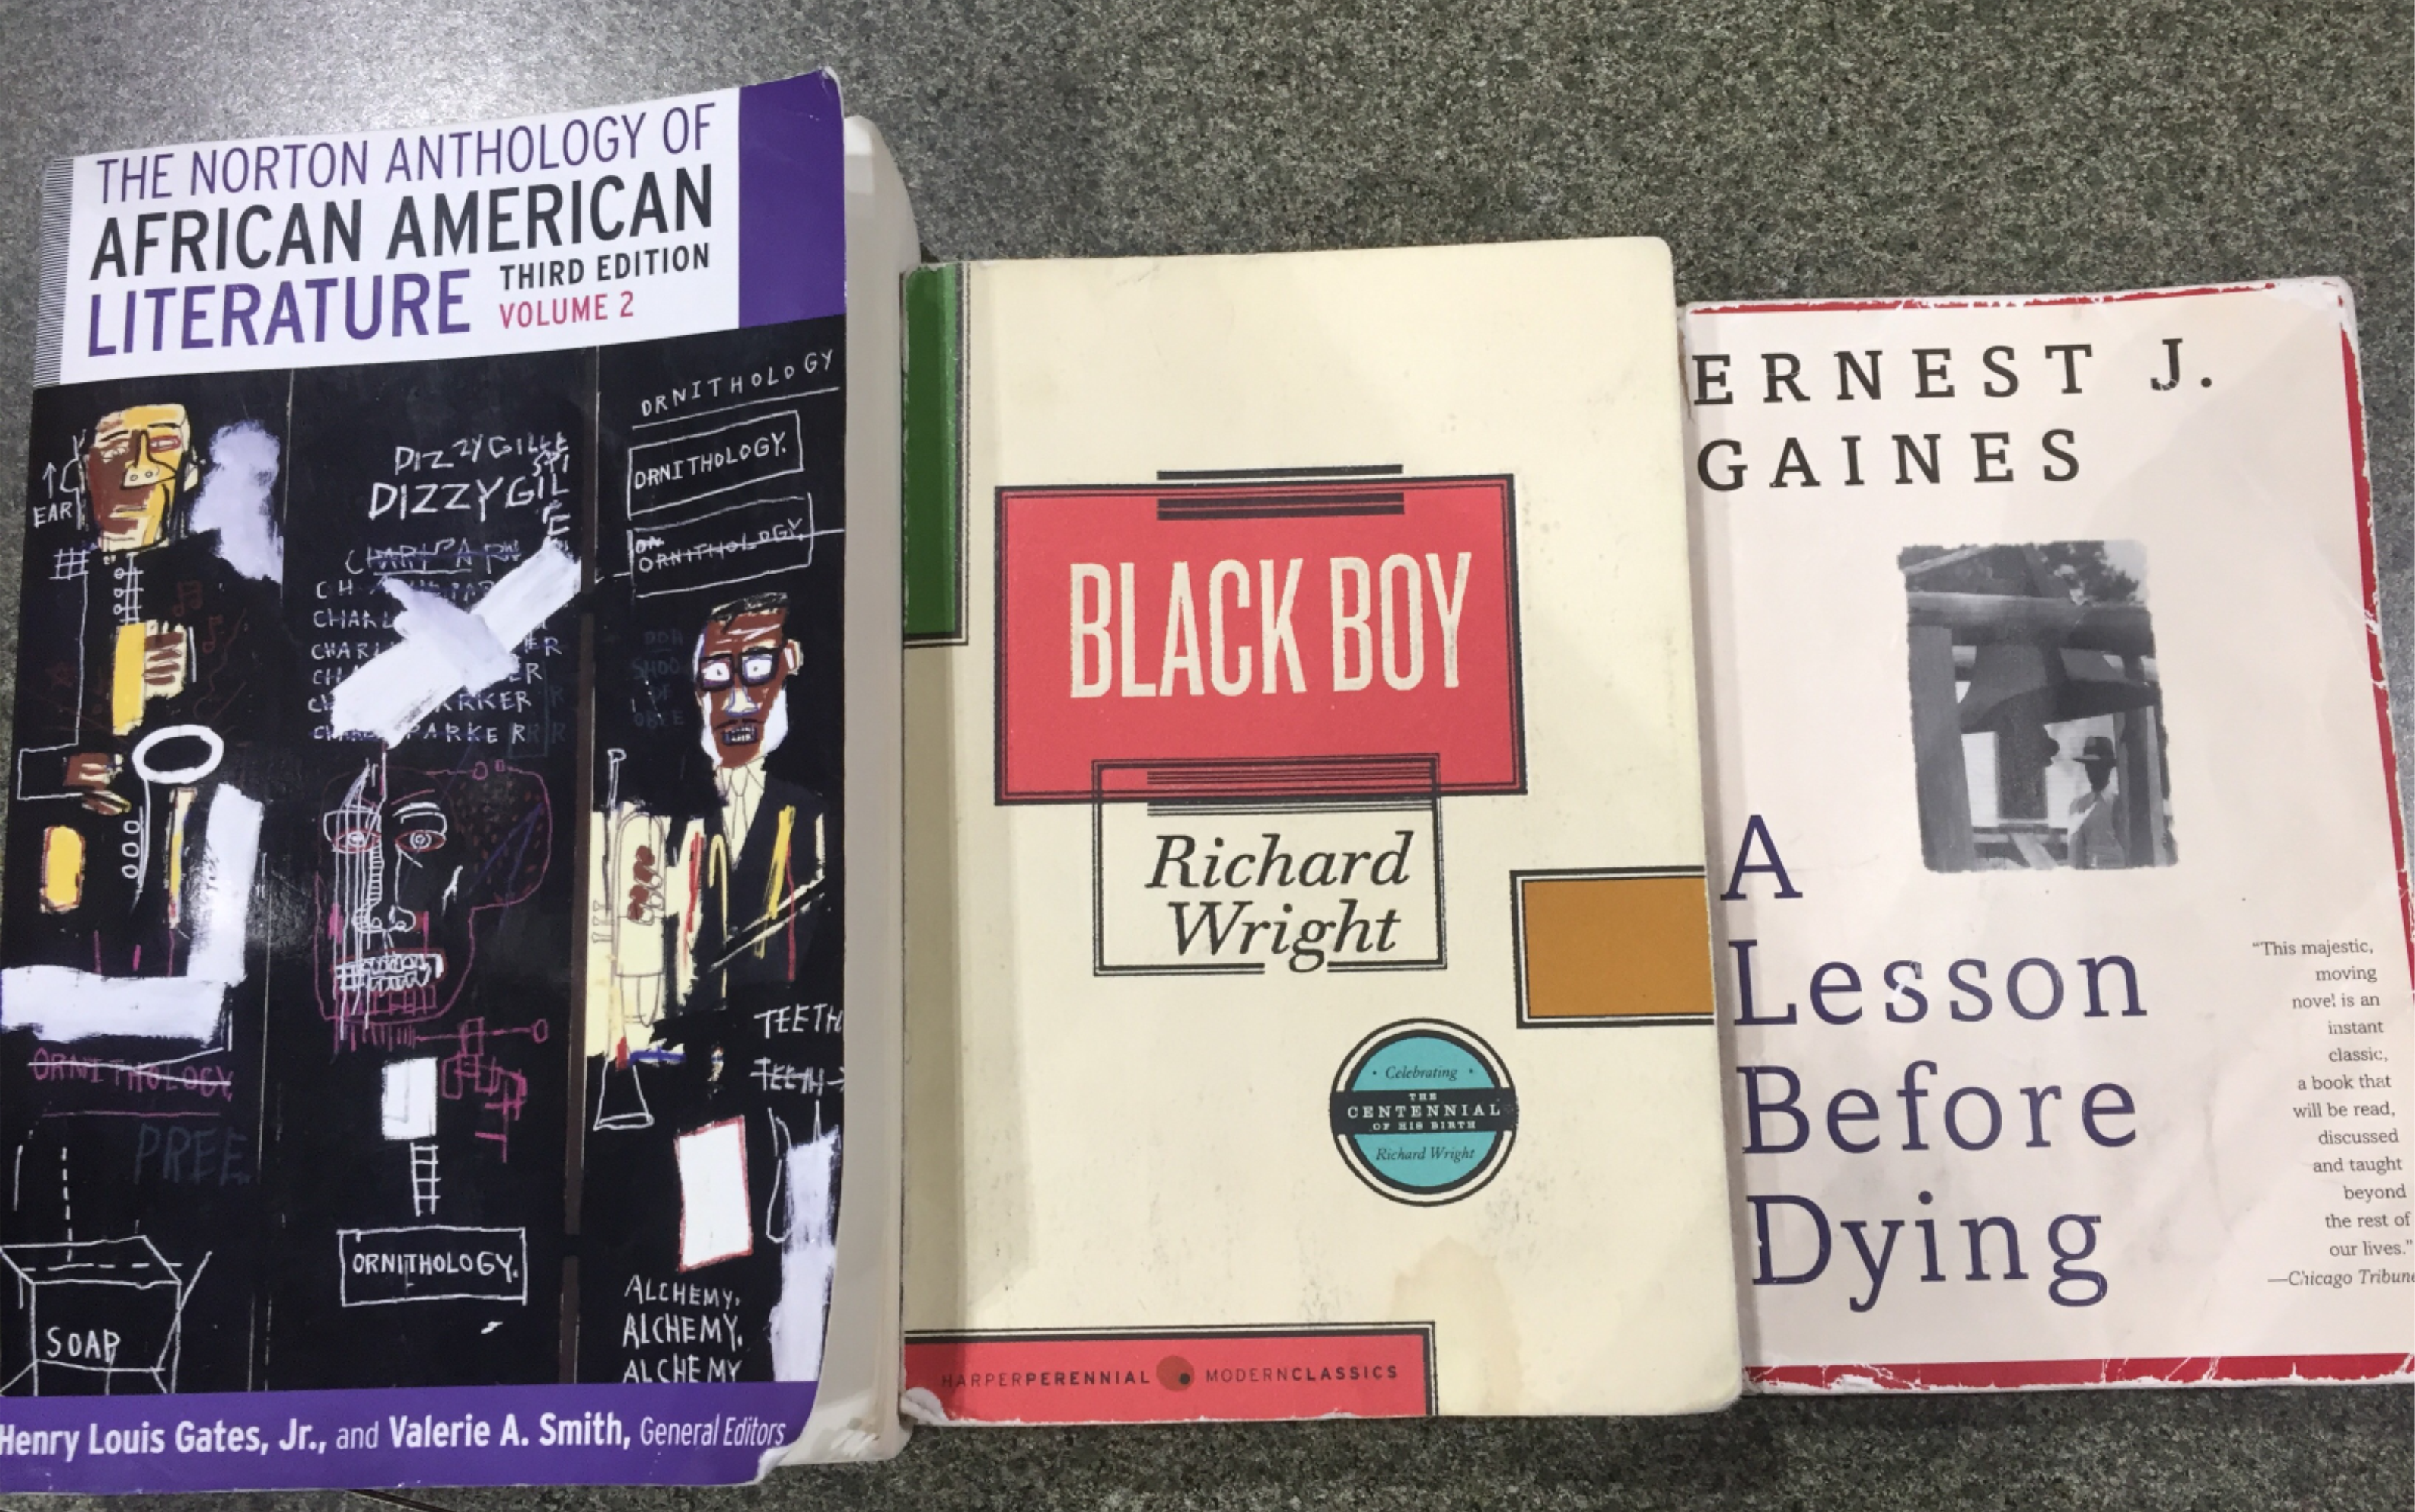 Three books on a table. The Norton Anthology of African American Literature (vol. 2), Black Boy, and A Lesson Before Dying